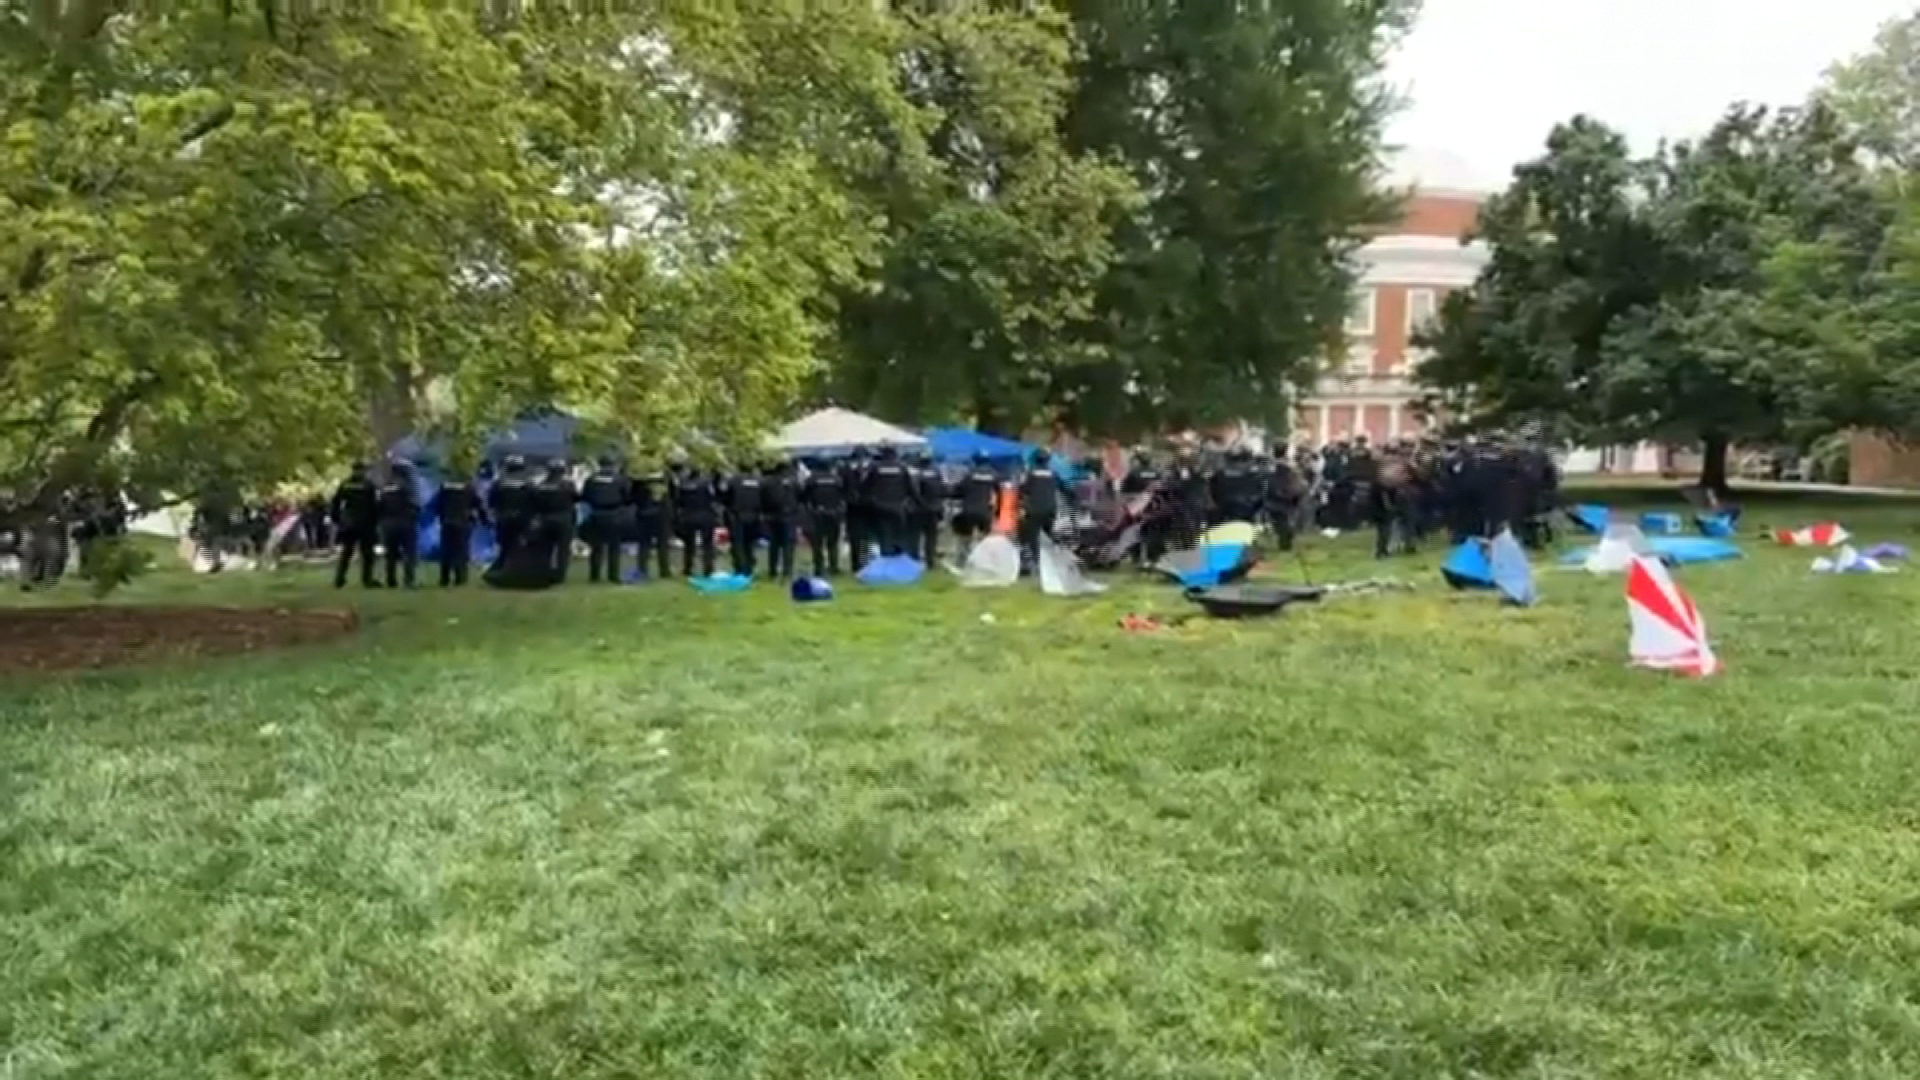 Police move toward people protesting in a pro-Palestinian encampment at the University of Virginia in Charlottesville on May 4.